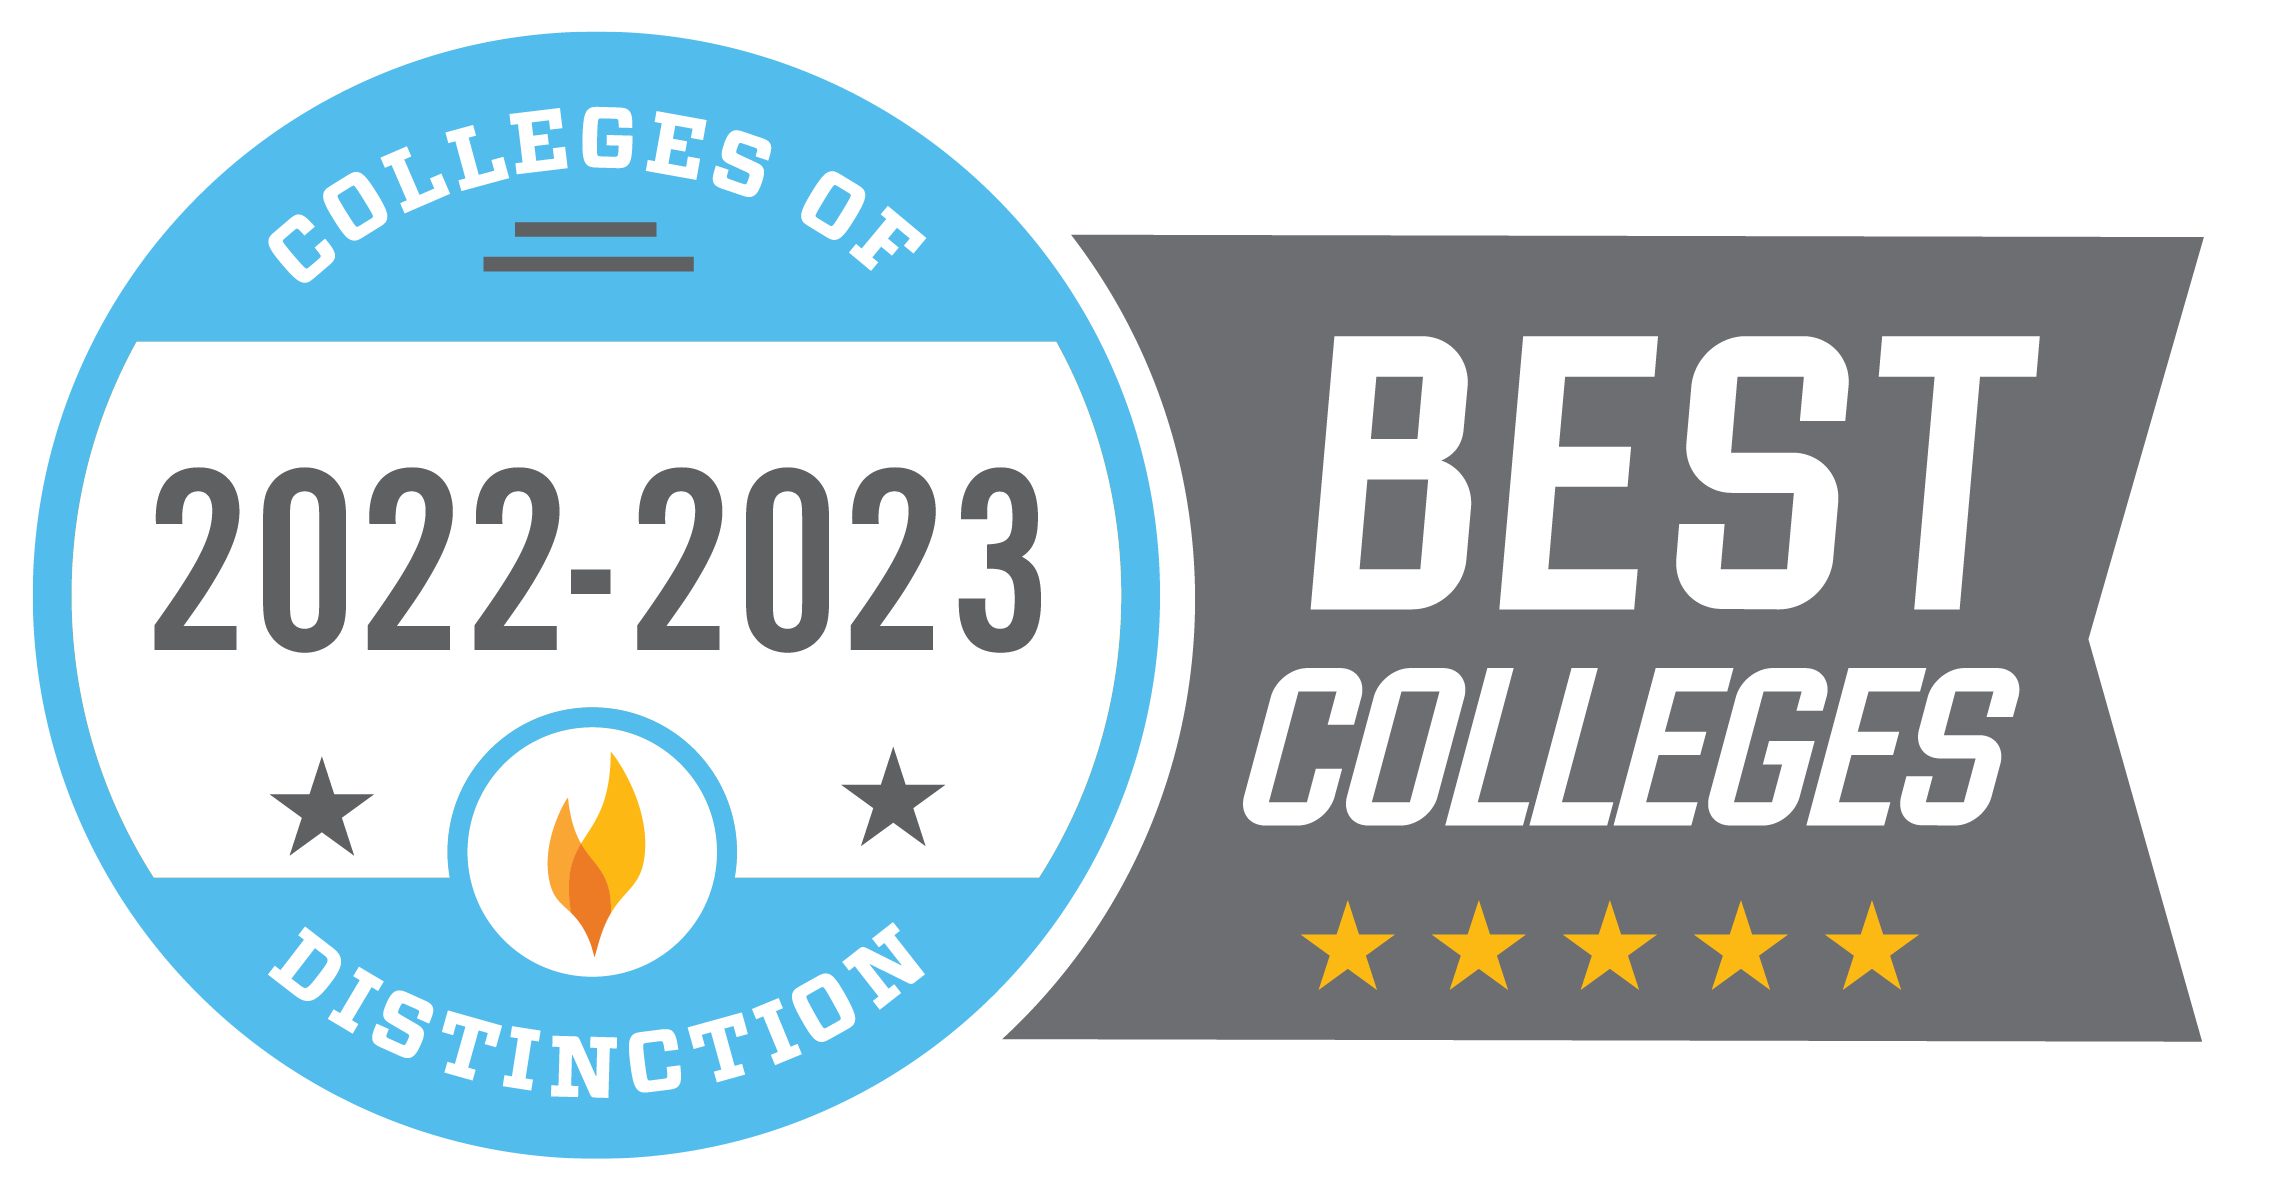 Overall College of Distinction 2022-23